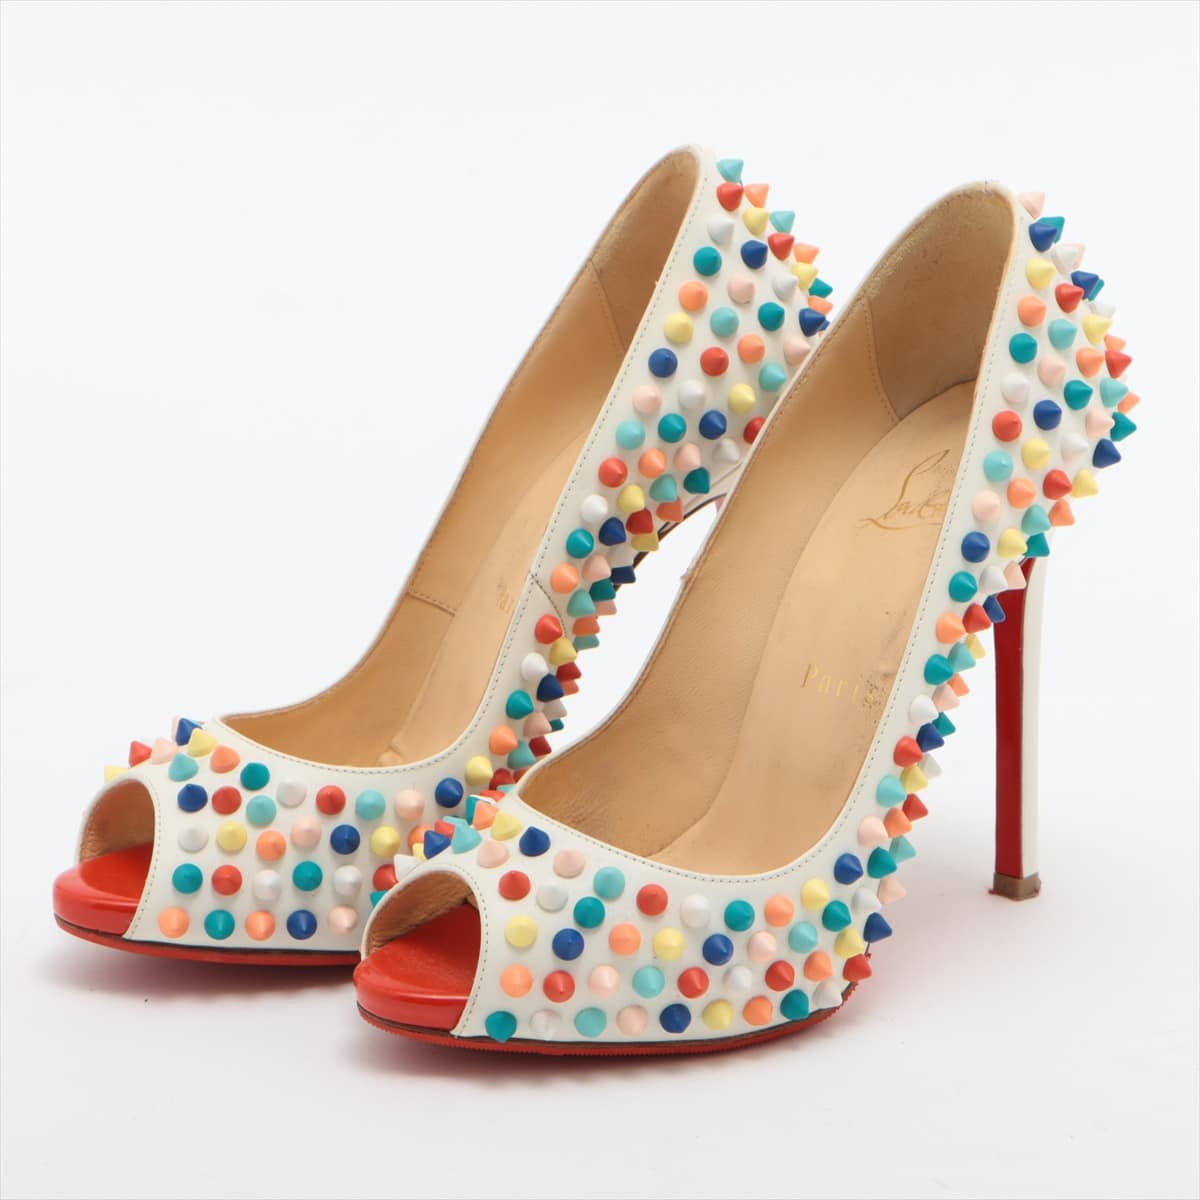 Christian Louboutin Studs Leather Open-toe Pumps 36 1/2 Ladies' White multicolor studs